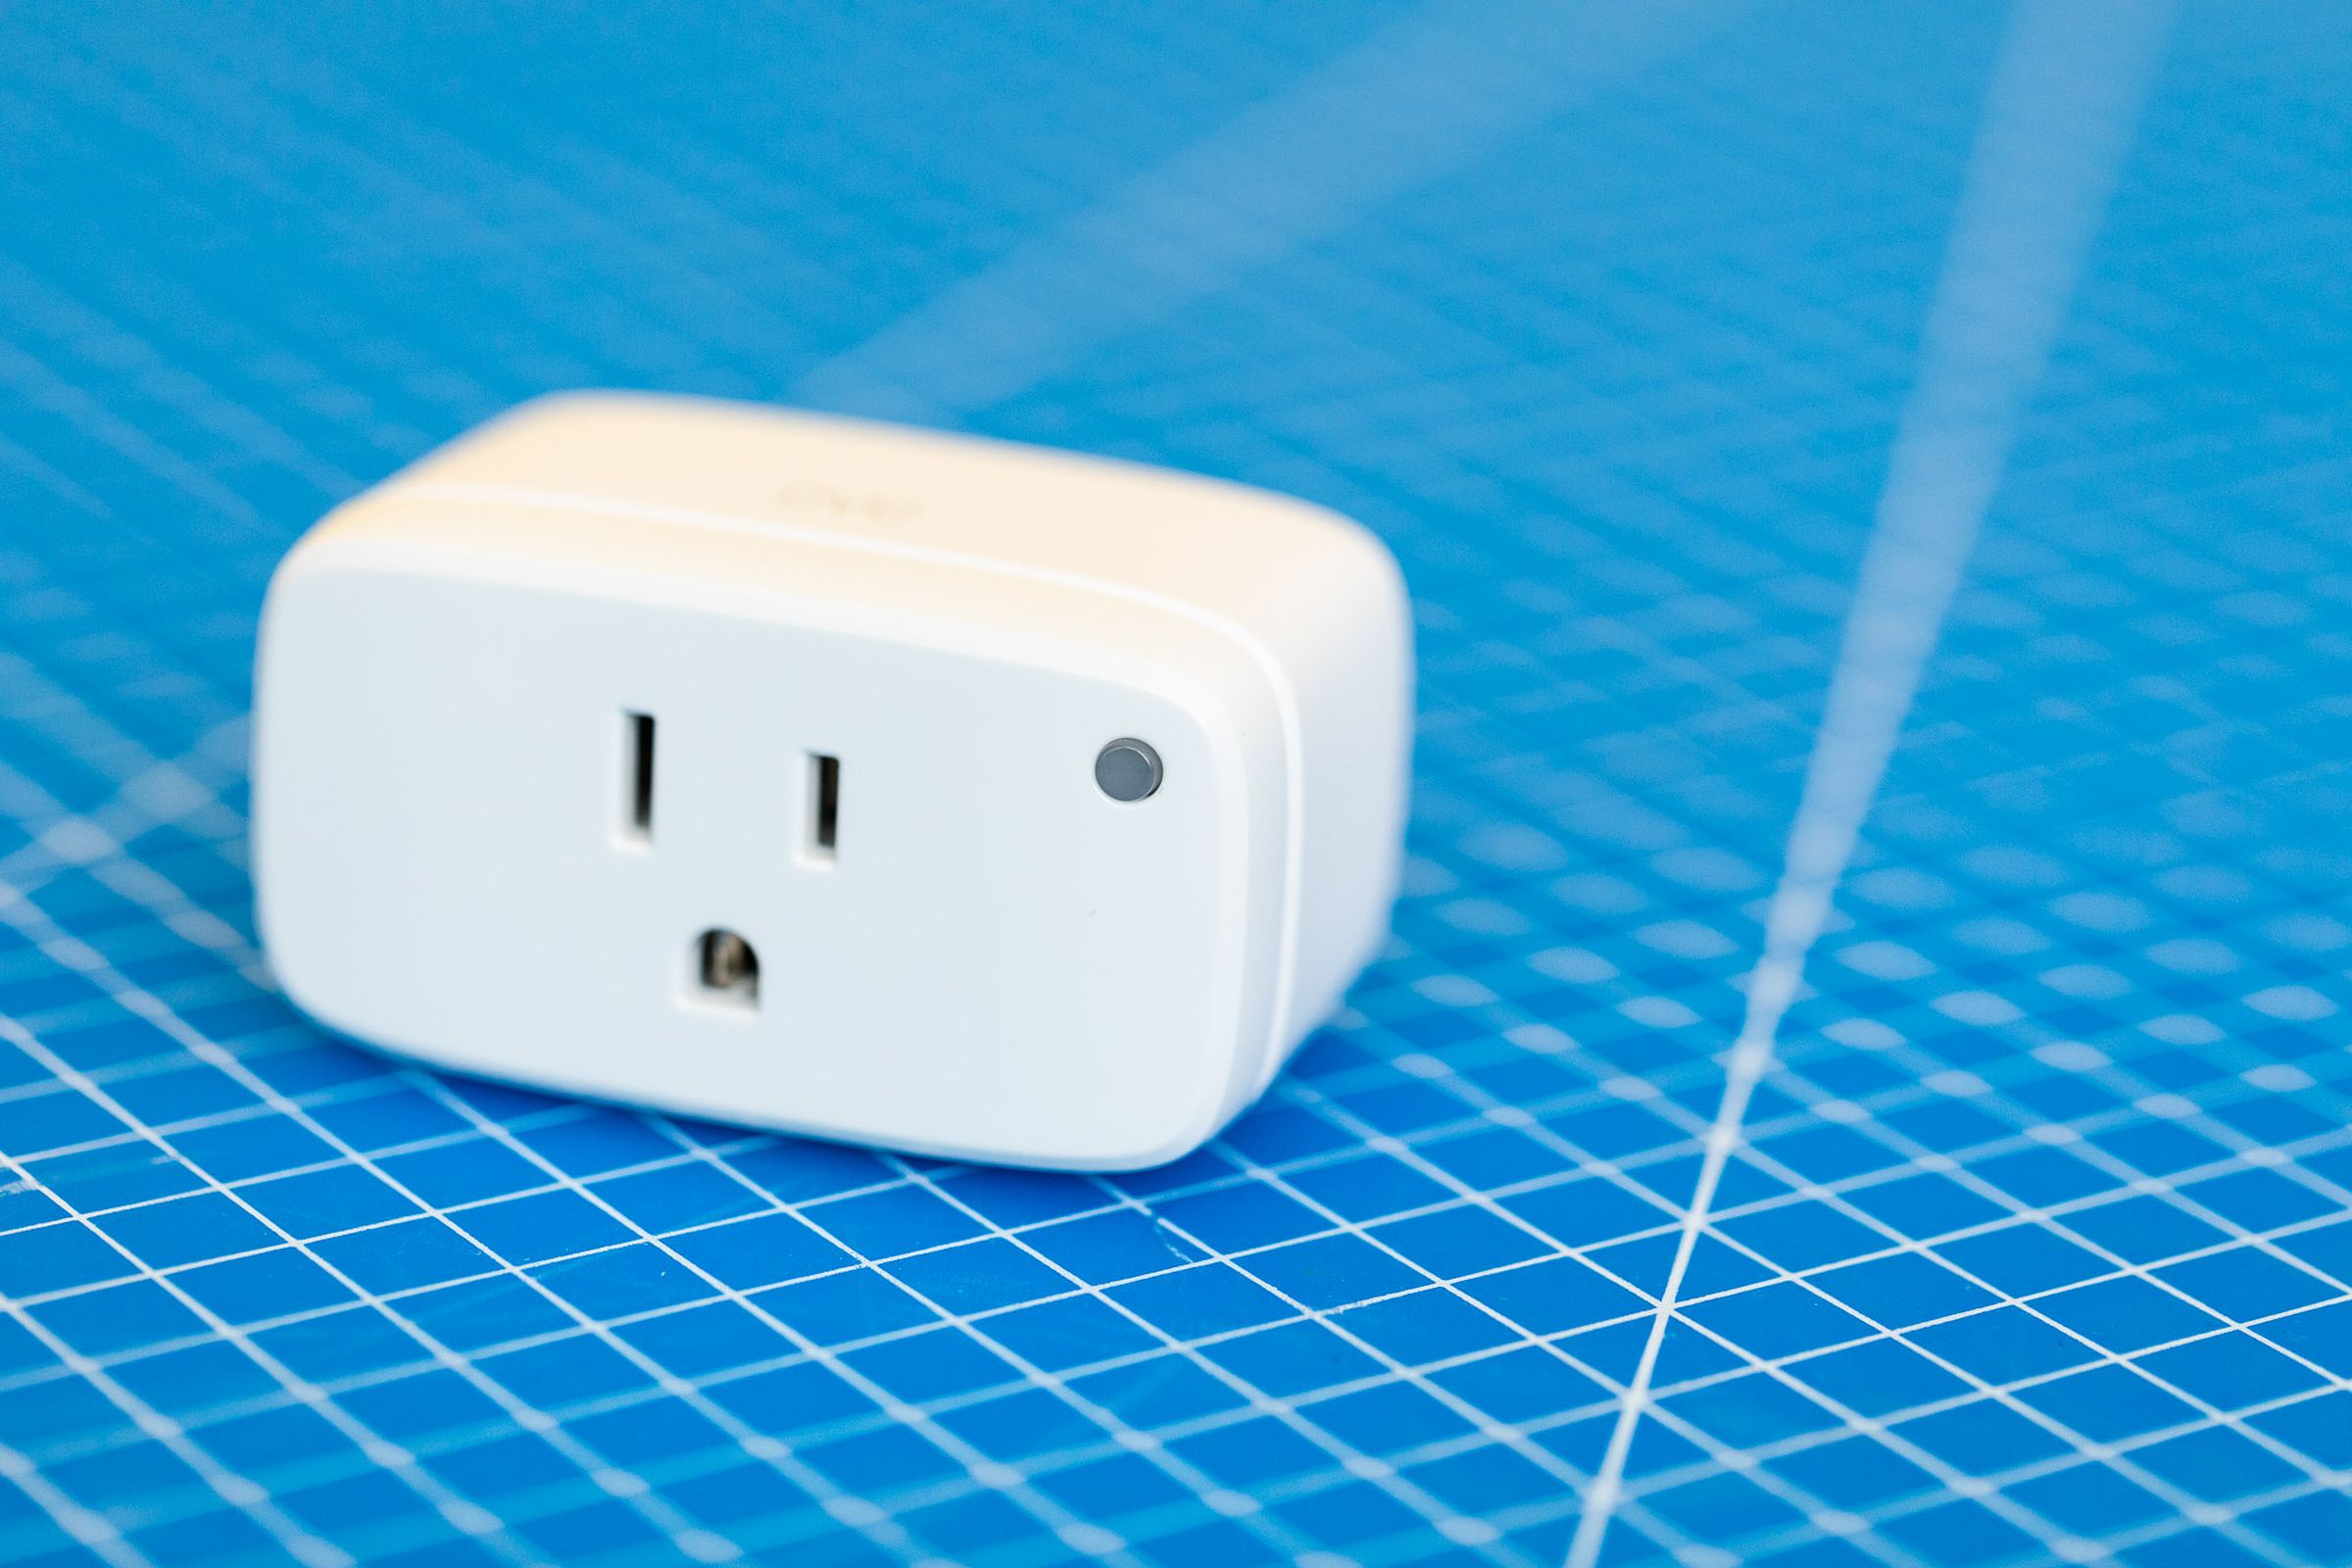 Eve Energy smart plug. A white rectangular prism with the broad face front. The corners and edges are rounded, there is a three-prong outlet on the front and a green LED on the upper-right corner of the front face. It sits on a blue background with a grid of white lines.